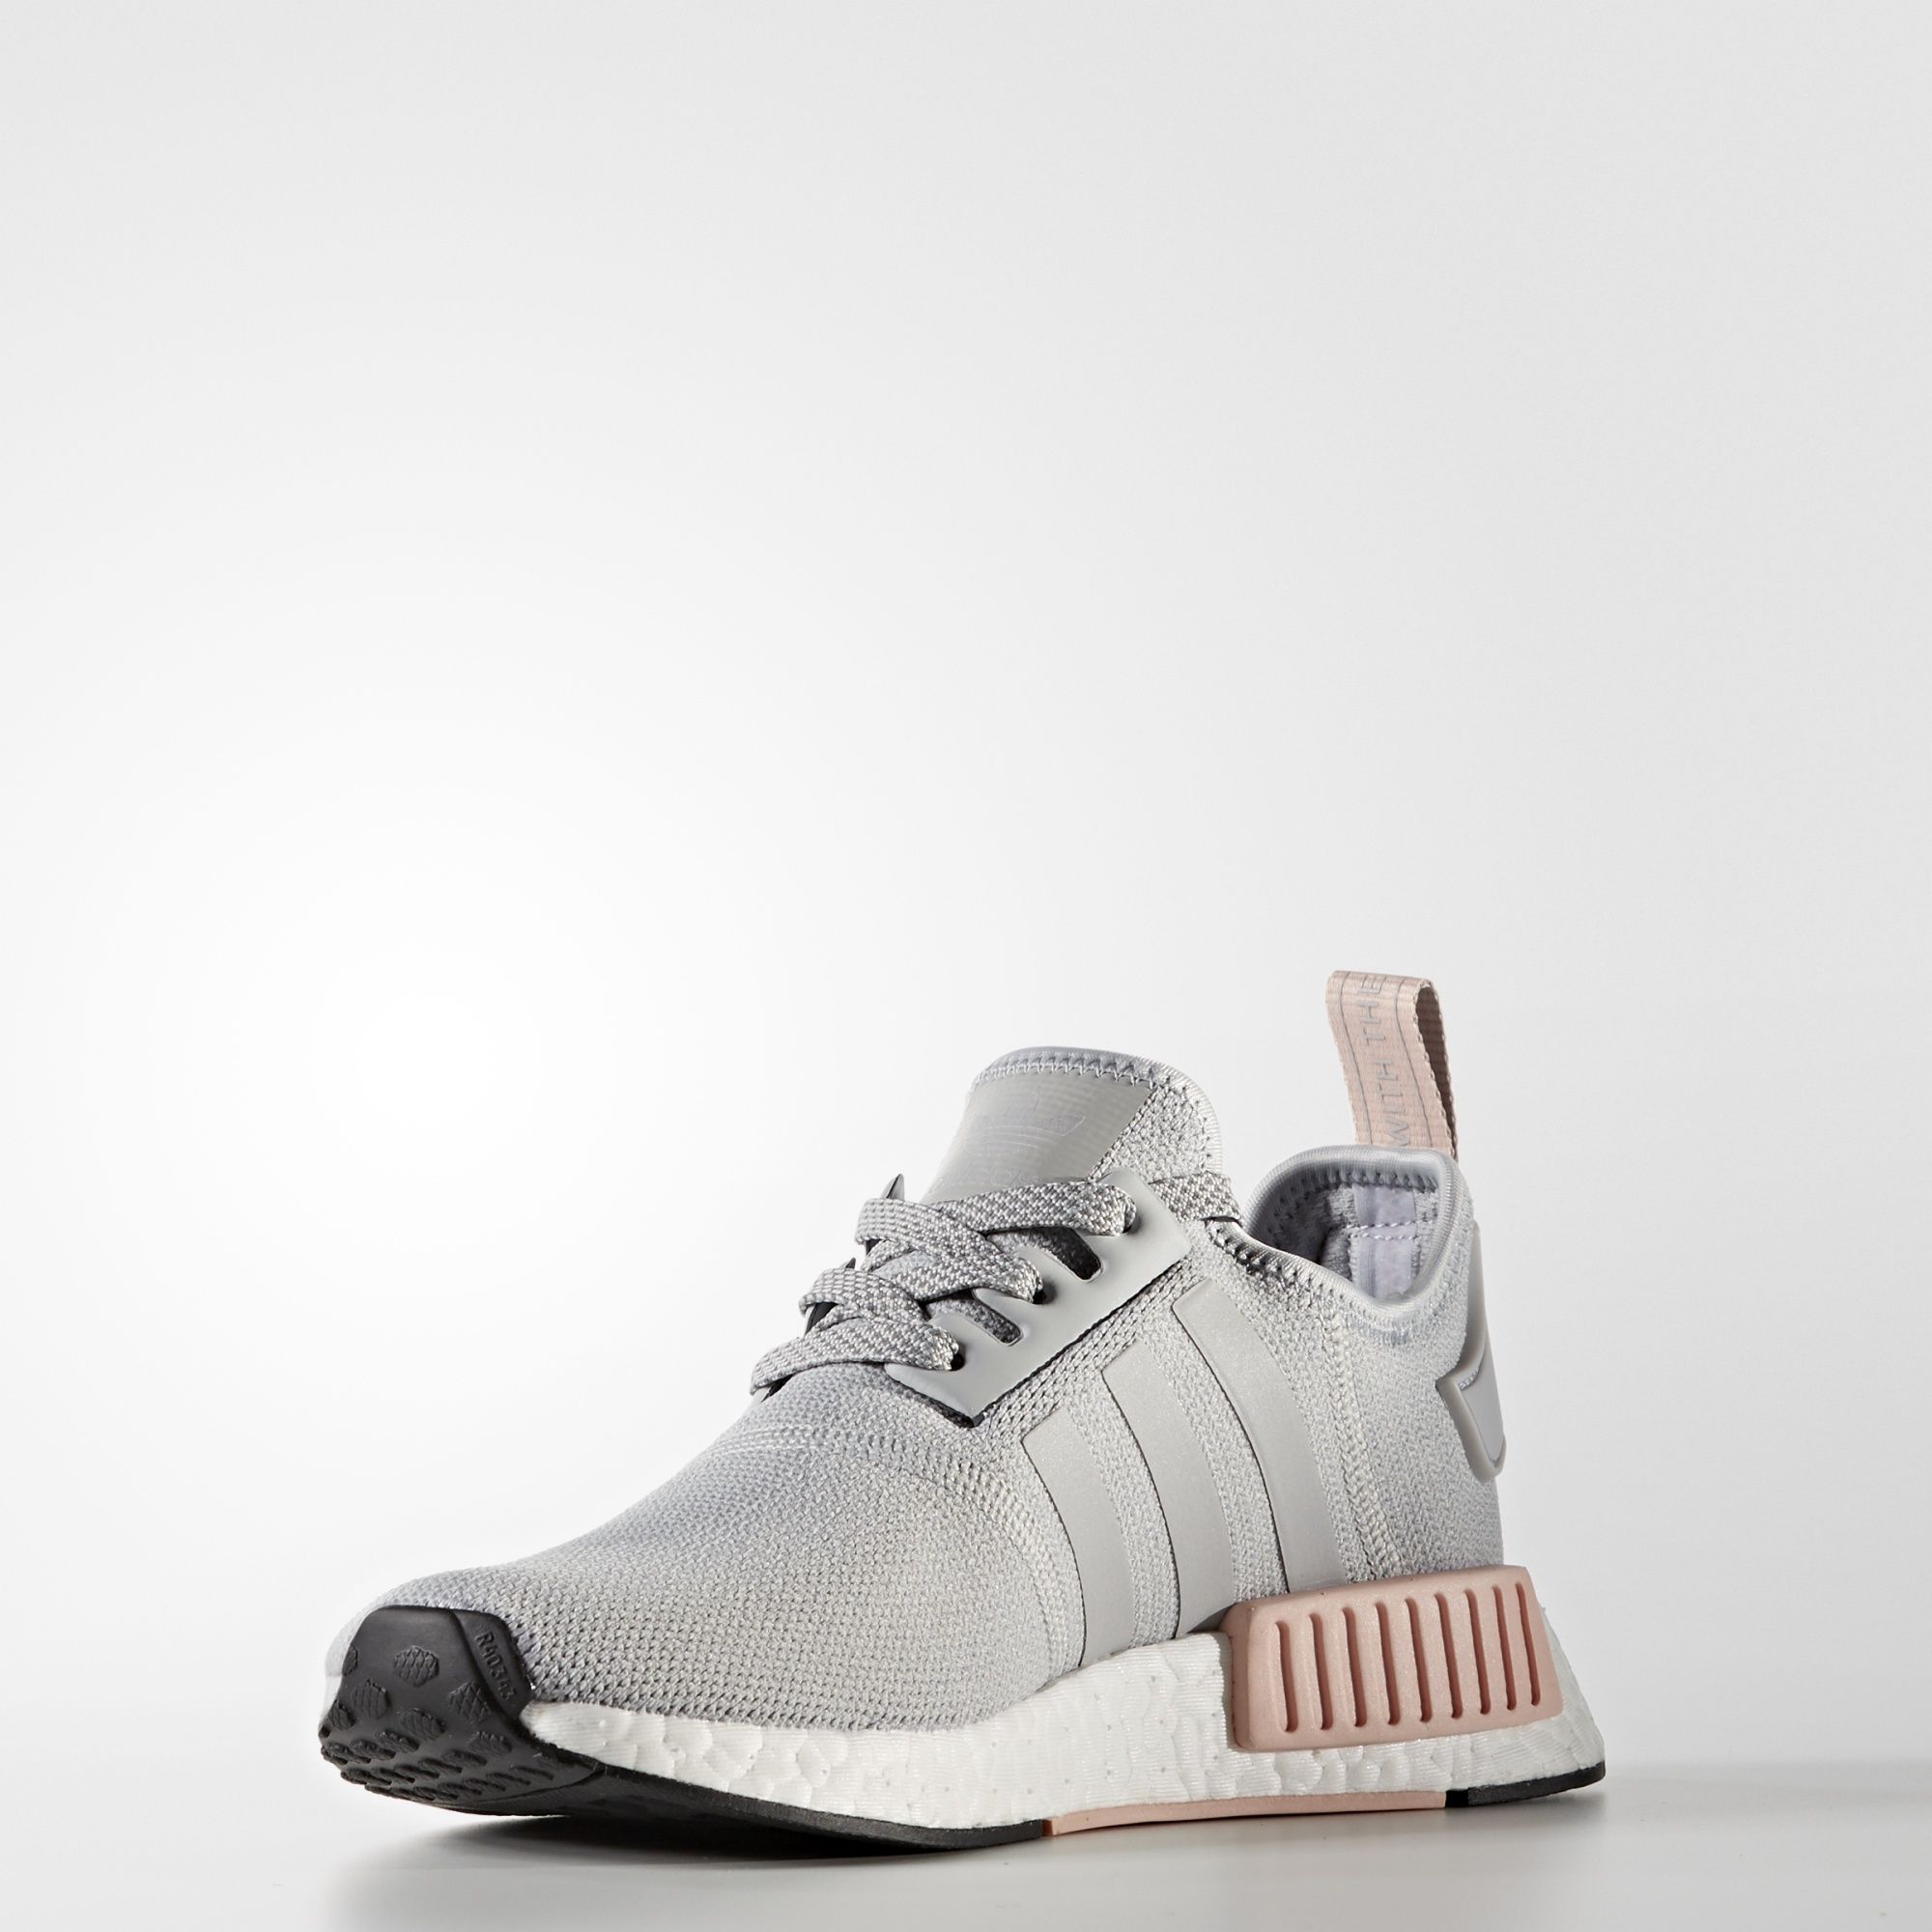 adidas-wmns-nmd_r1-clear-onix-vapour-pink-3